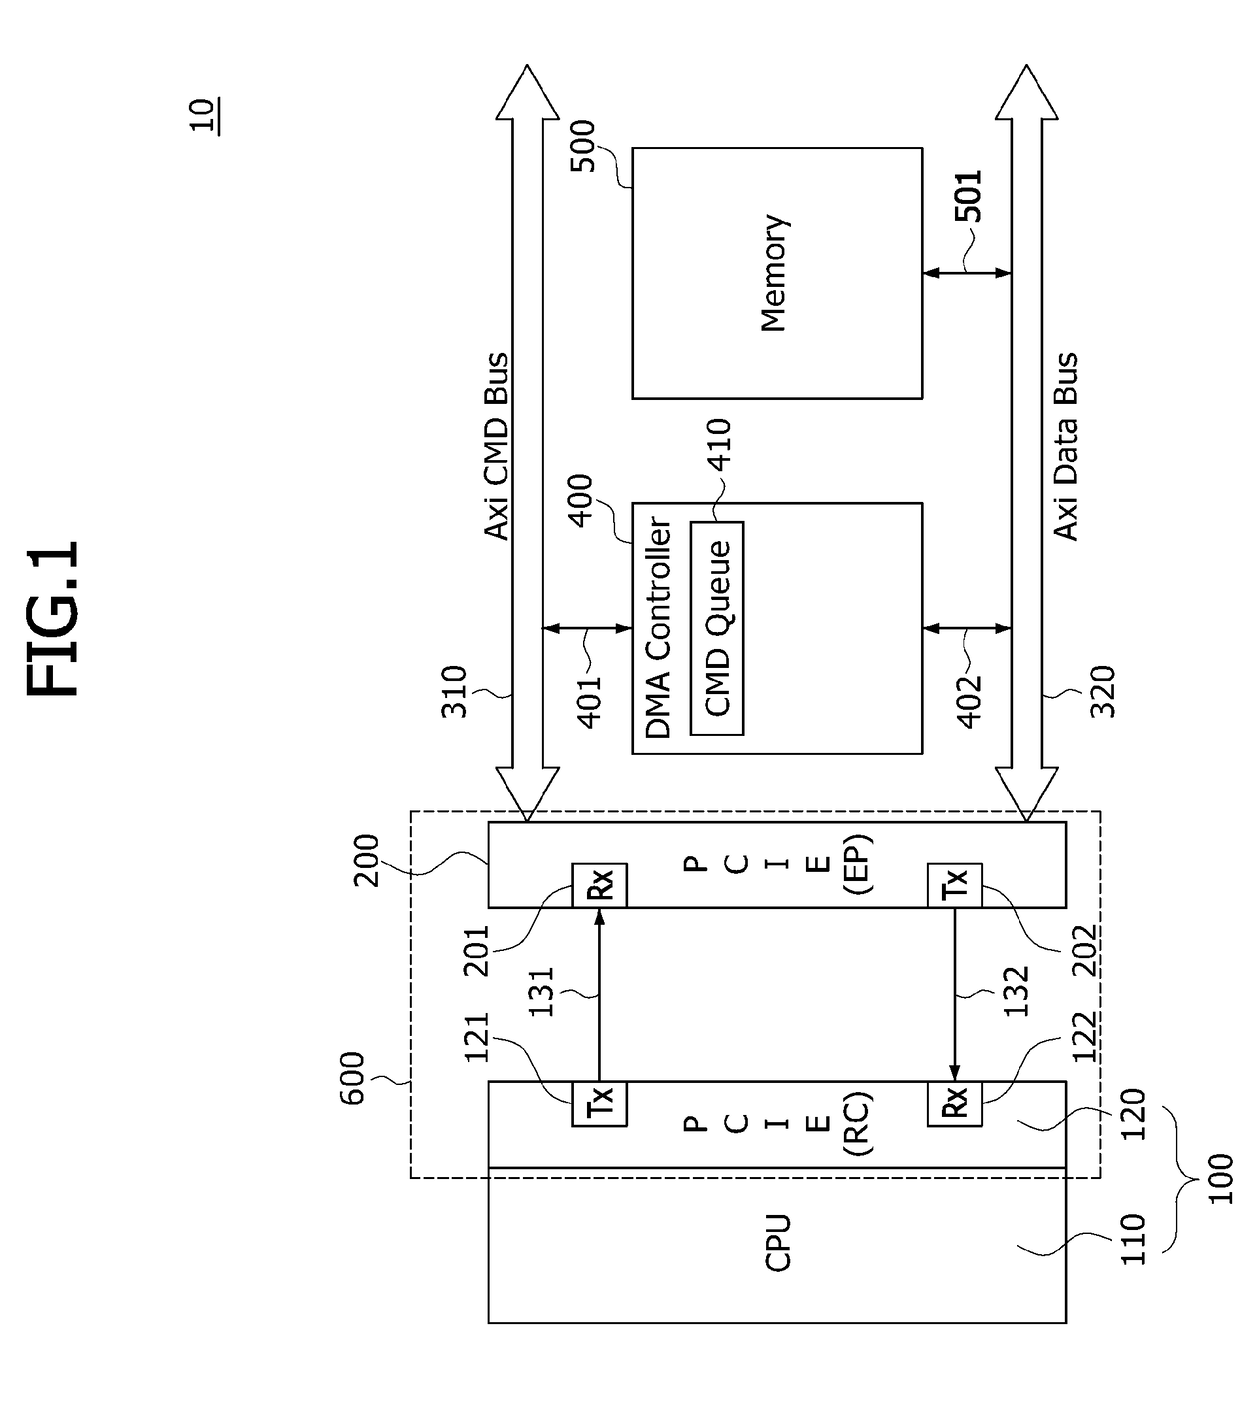 Electronic systems having serial system bus interfaces and direct memory access controllers and methods of operating the same